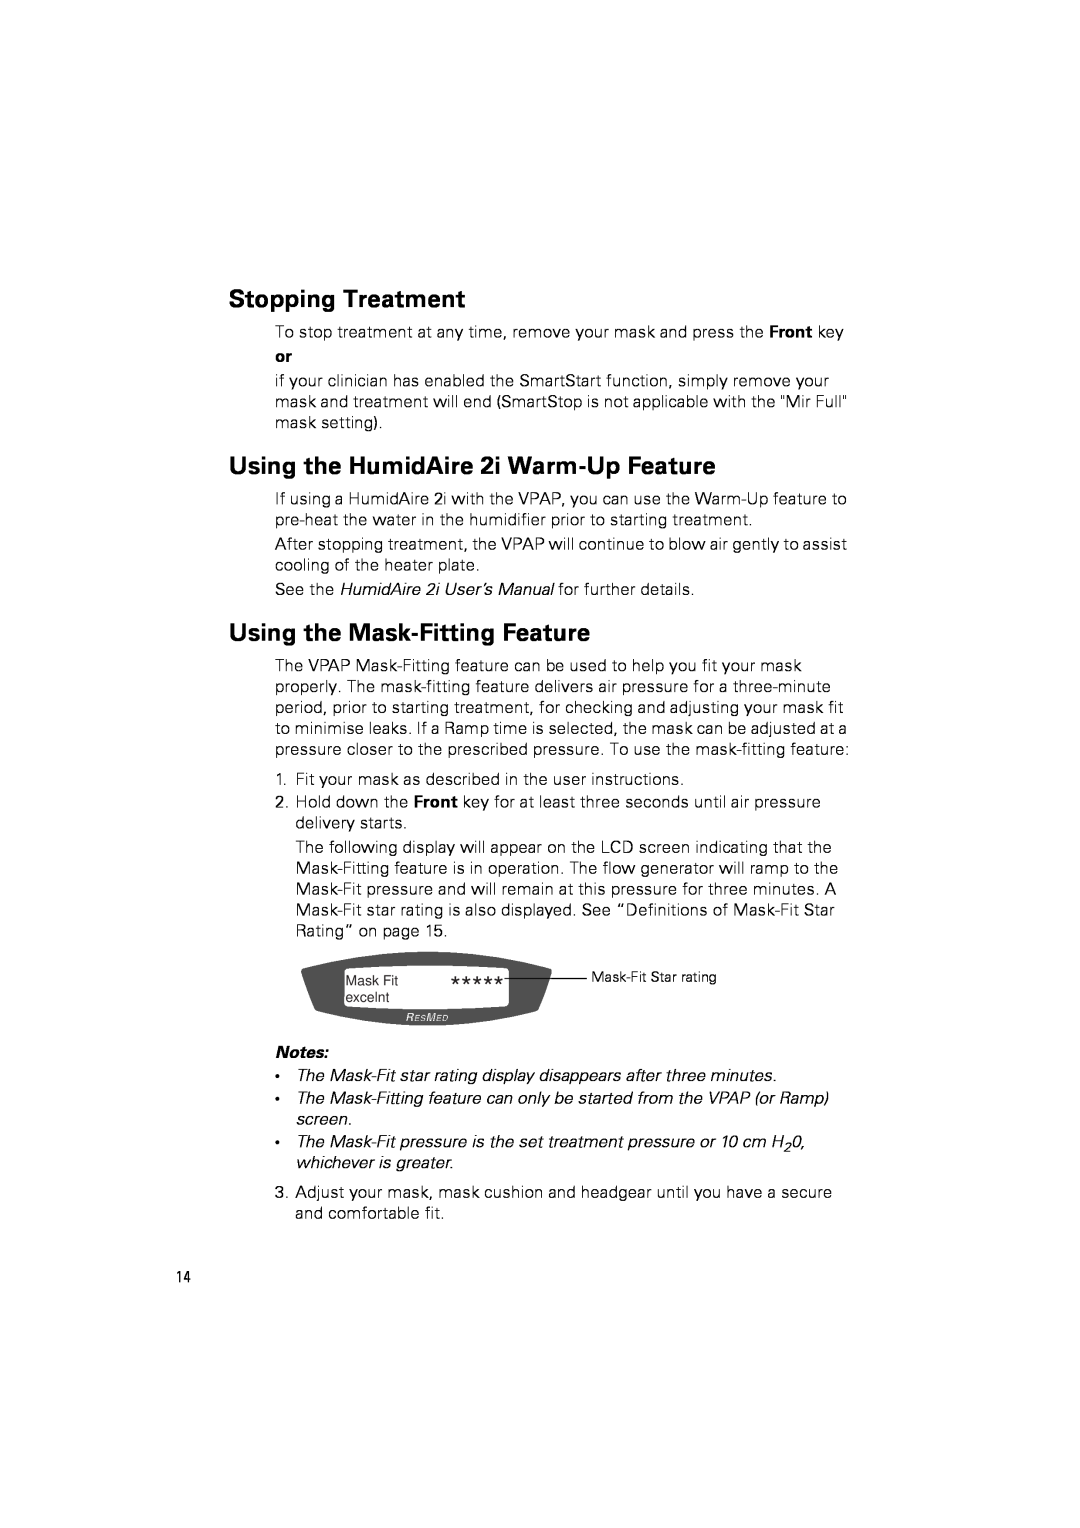 ResMed III user manual Stopping Treatment, Using the HumidAire 2i Warm-UpFeature, Using the Mask-FittingFeature 